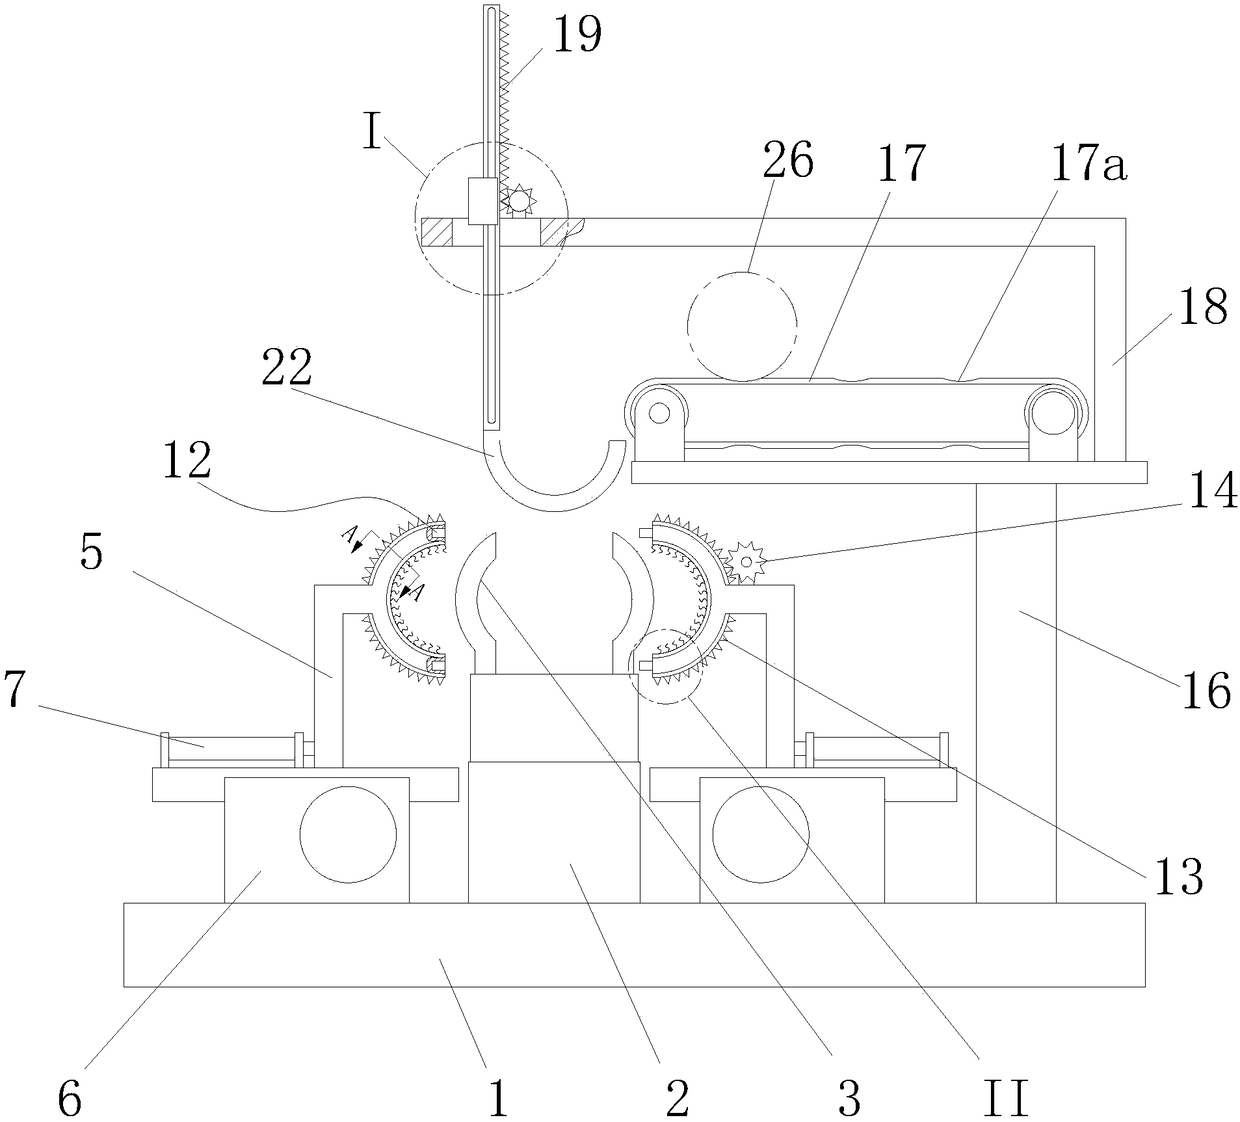 Automatic round bar grinding machine capable of achieving automatic feeding